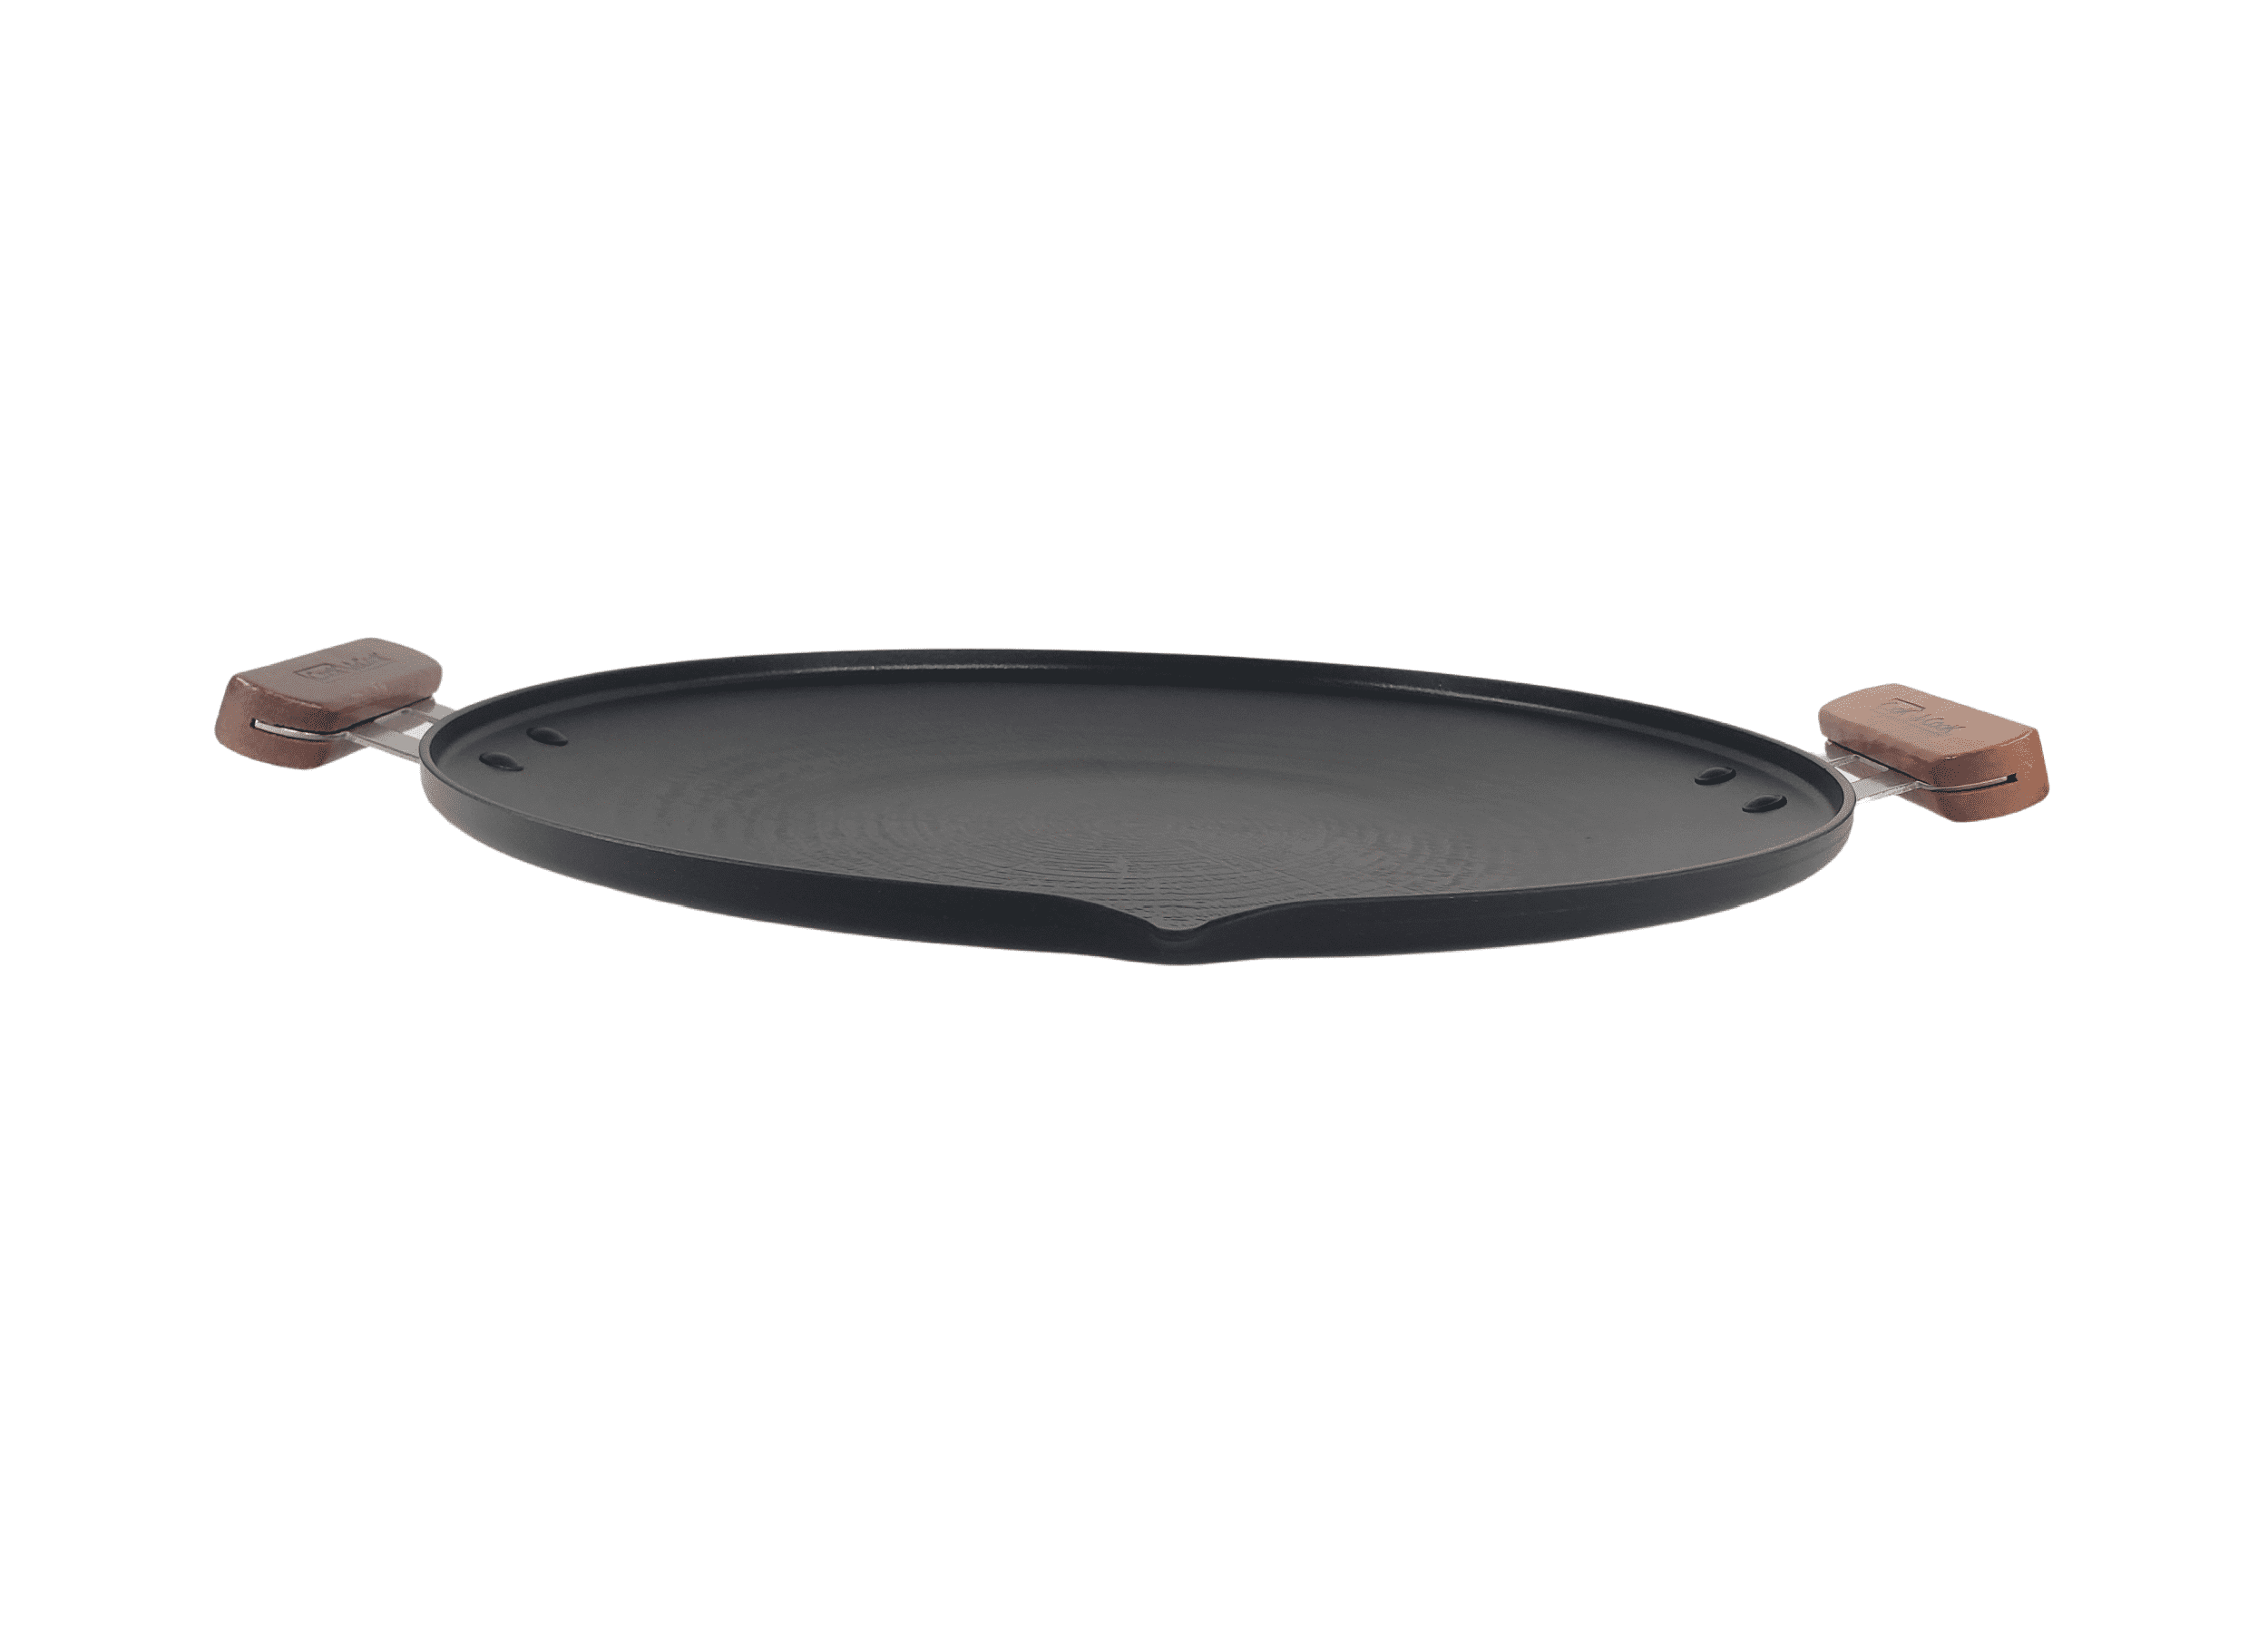 Premium 13.5 Korean BBQ Non-Stick Griddle Grill Pan with Wooden Handle, Induction Stove Cooktop Compatible